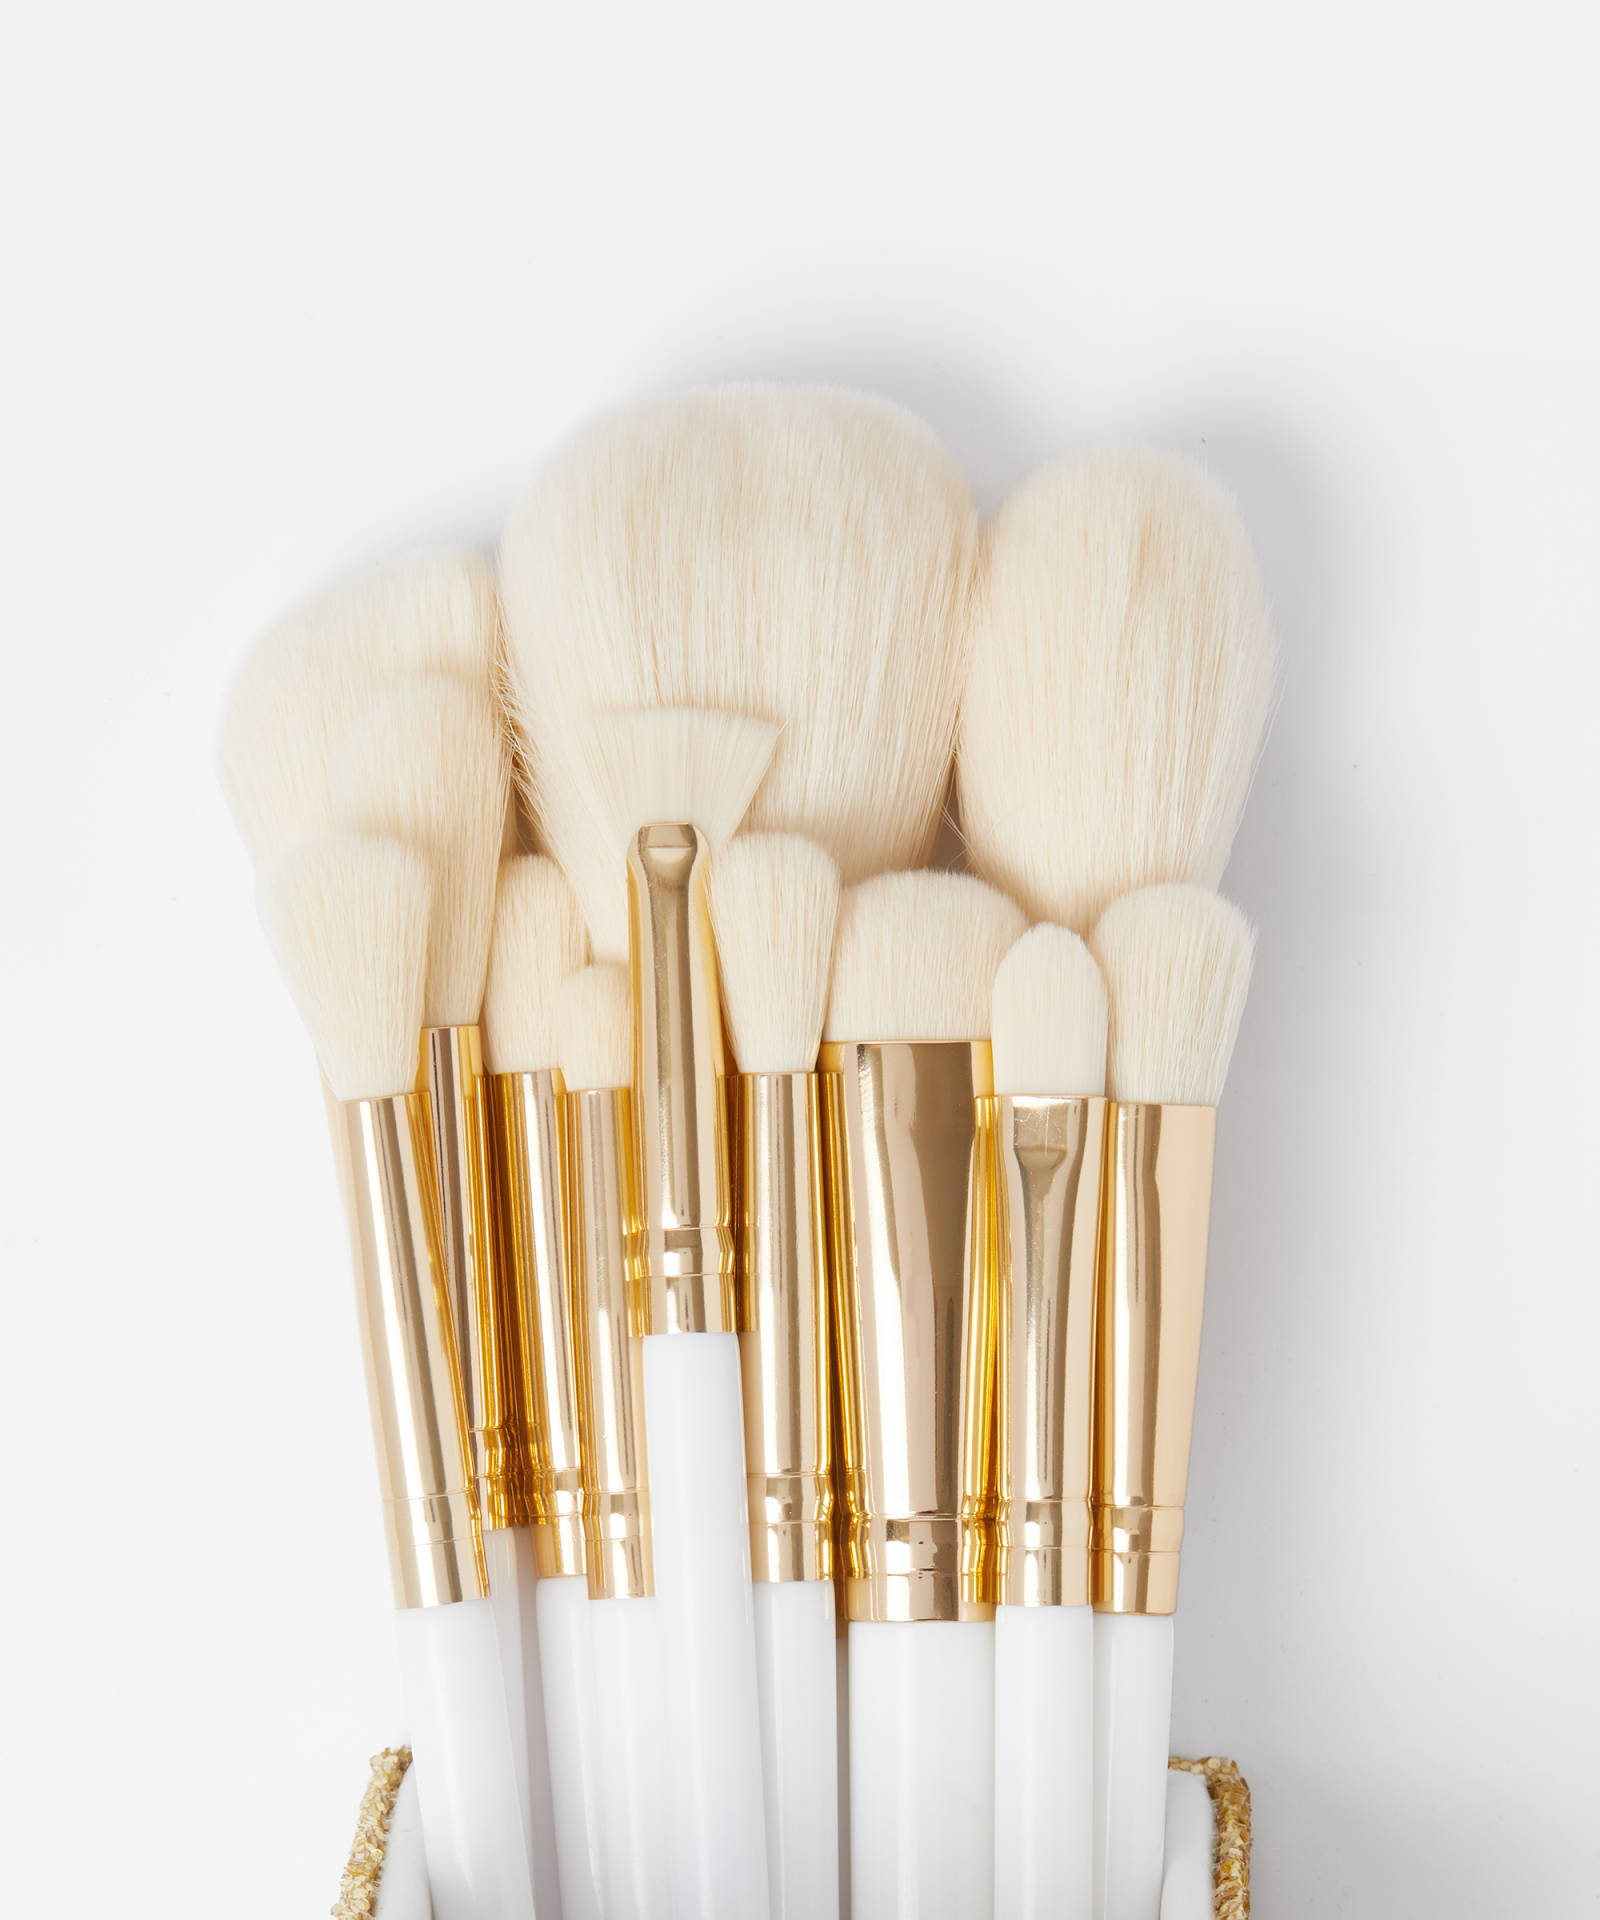 BH Cosmetics There’s Snowbody Like You 12 Piece Brush Set